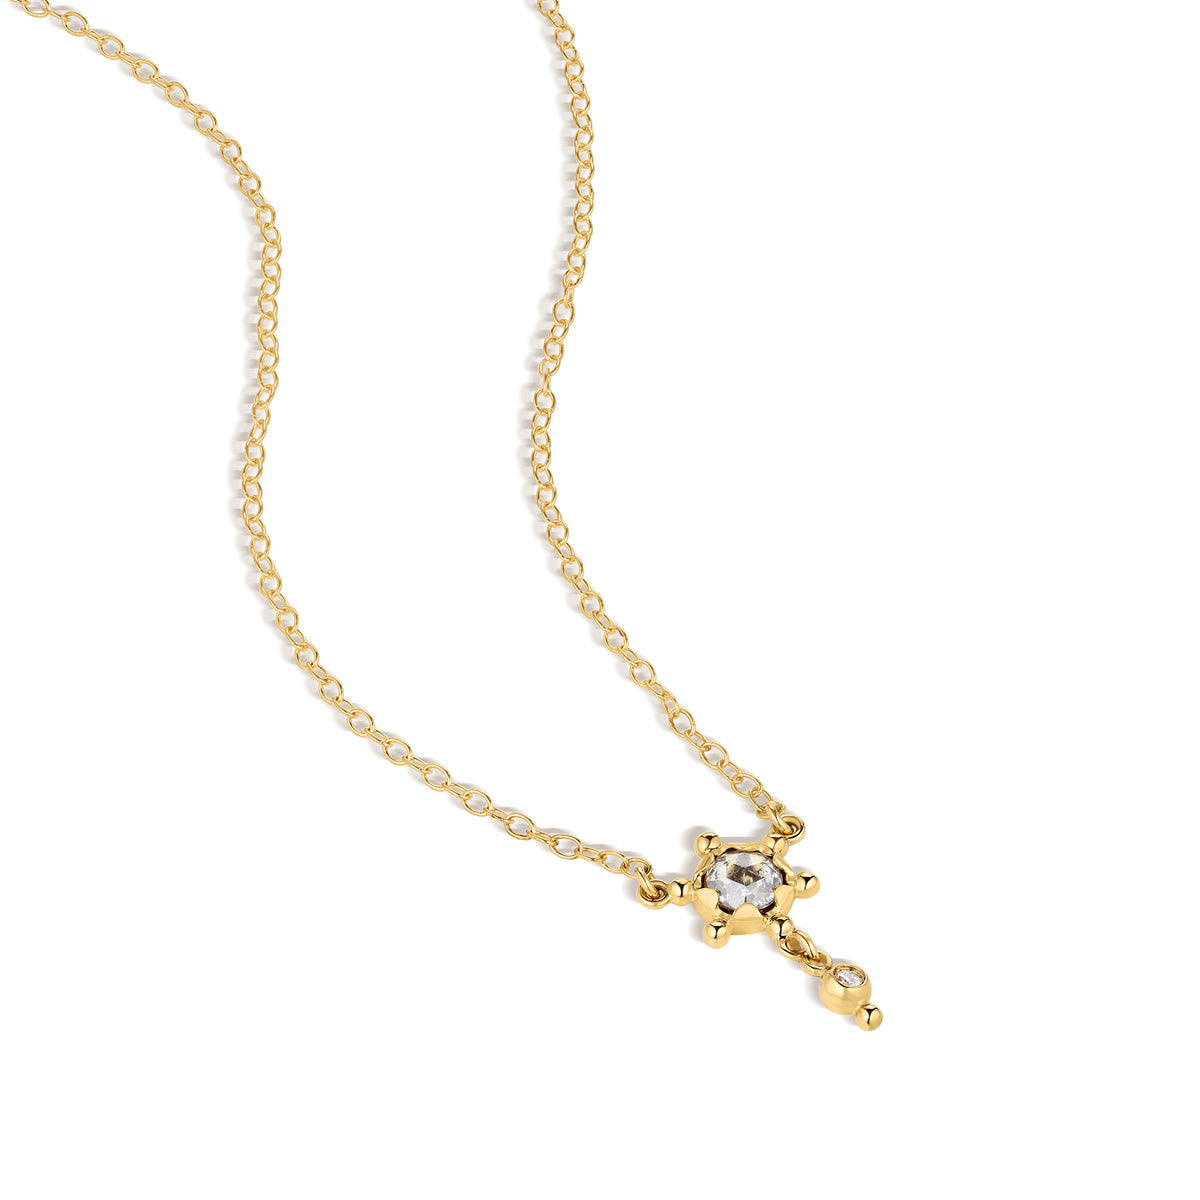 Star Bright Sapphire Necklace